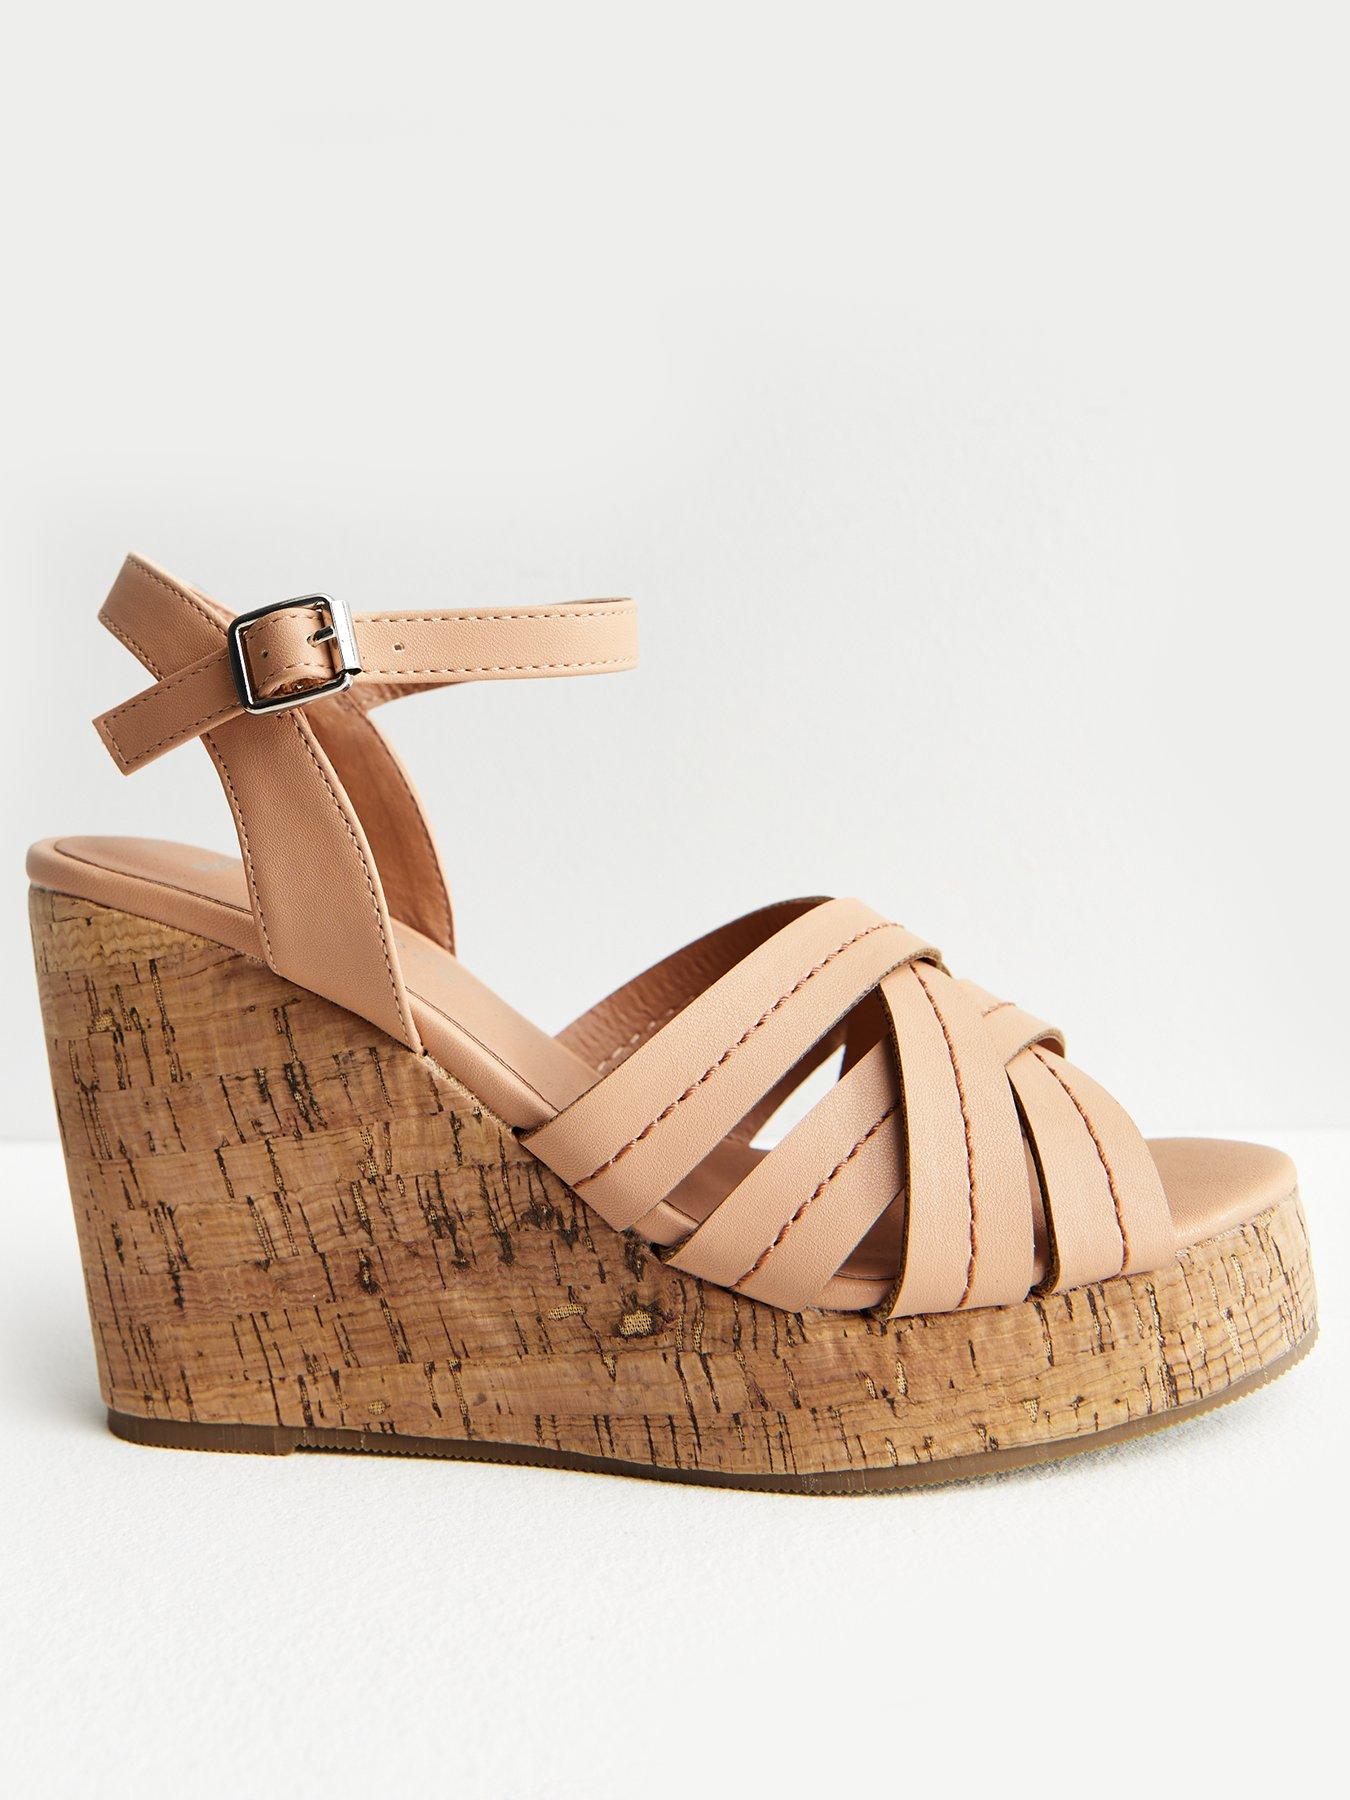 New Look Off White Leather-Look Strappy Espadrille Wedge Heel